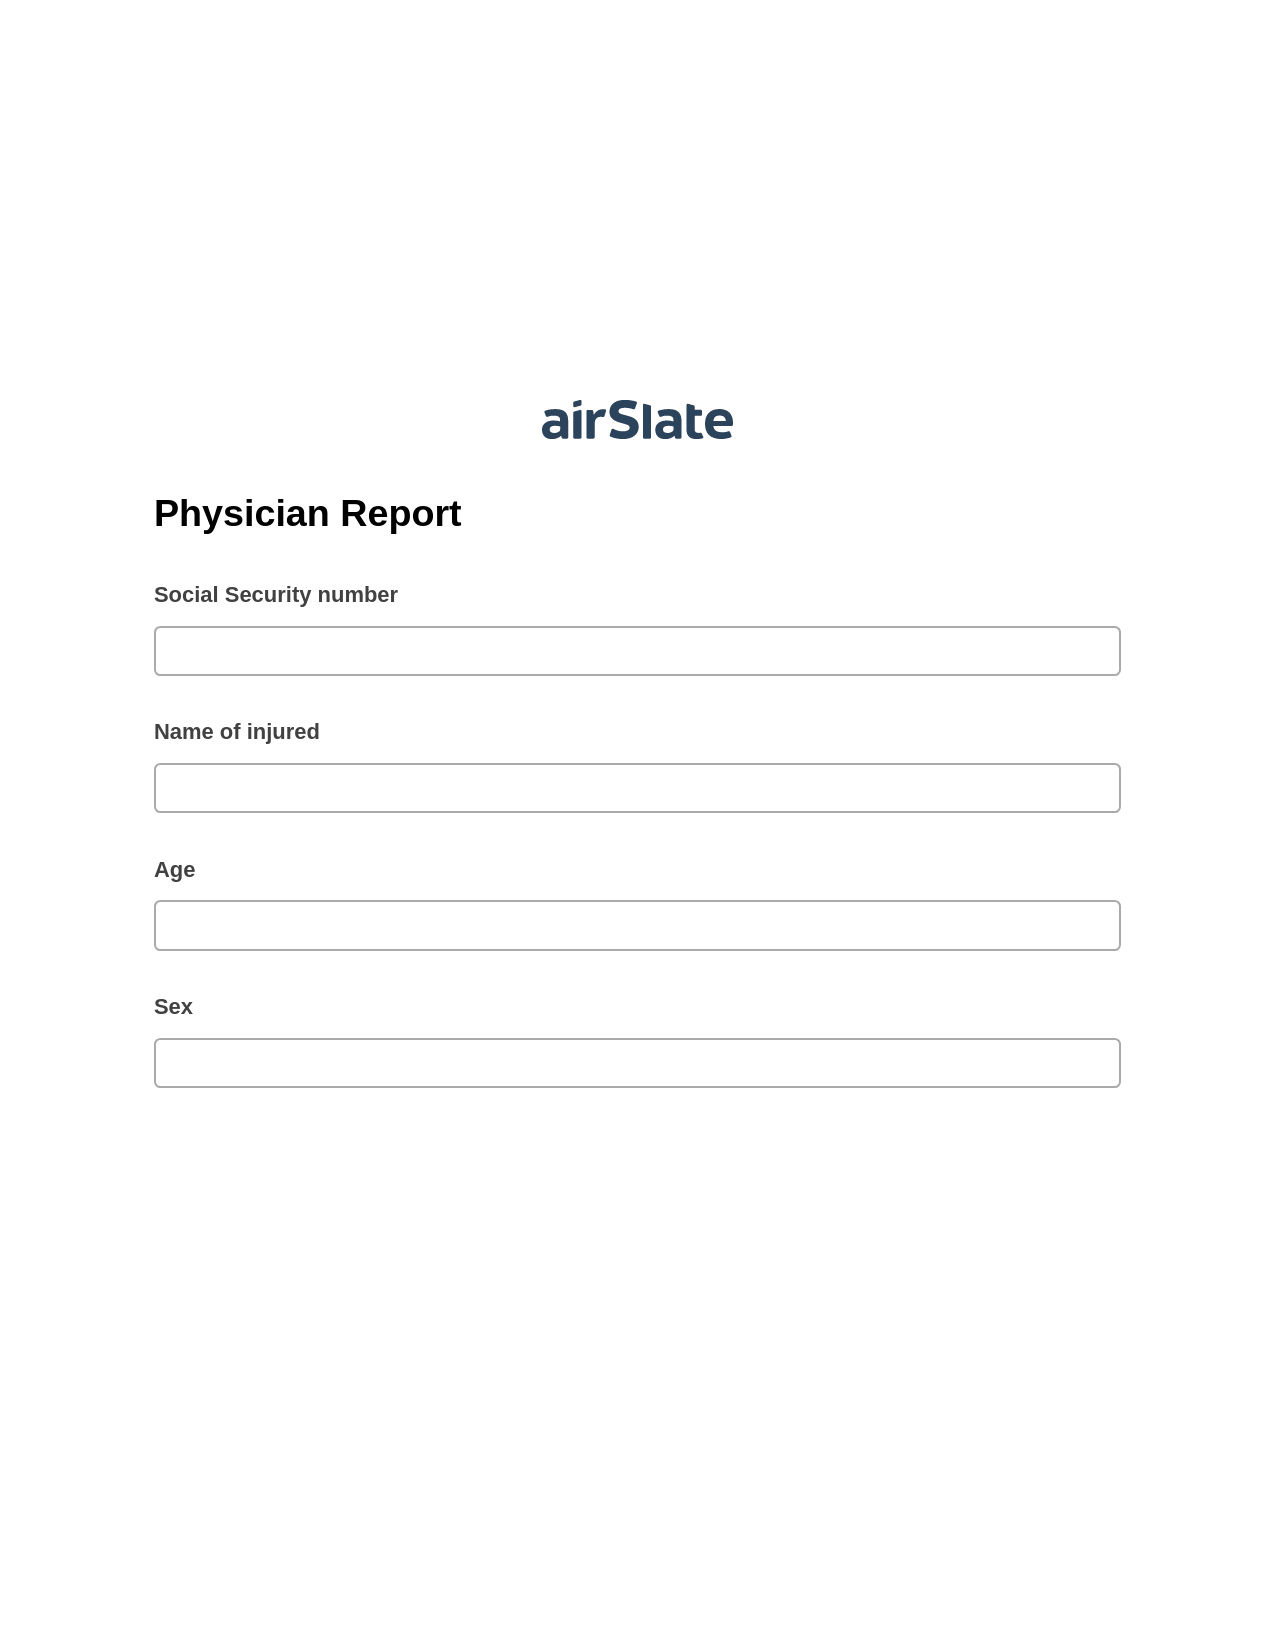 Multirole Physician Report Pre-fill Dropdowns from Airtable, Google Sheet Two-Way Binding Bot, Post-finish Document Bot